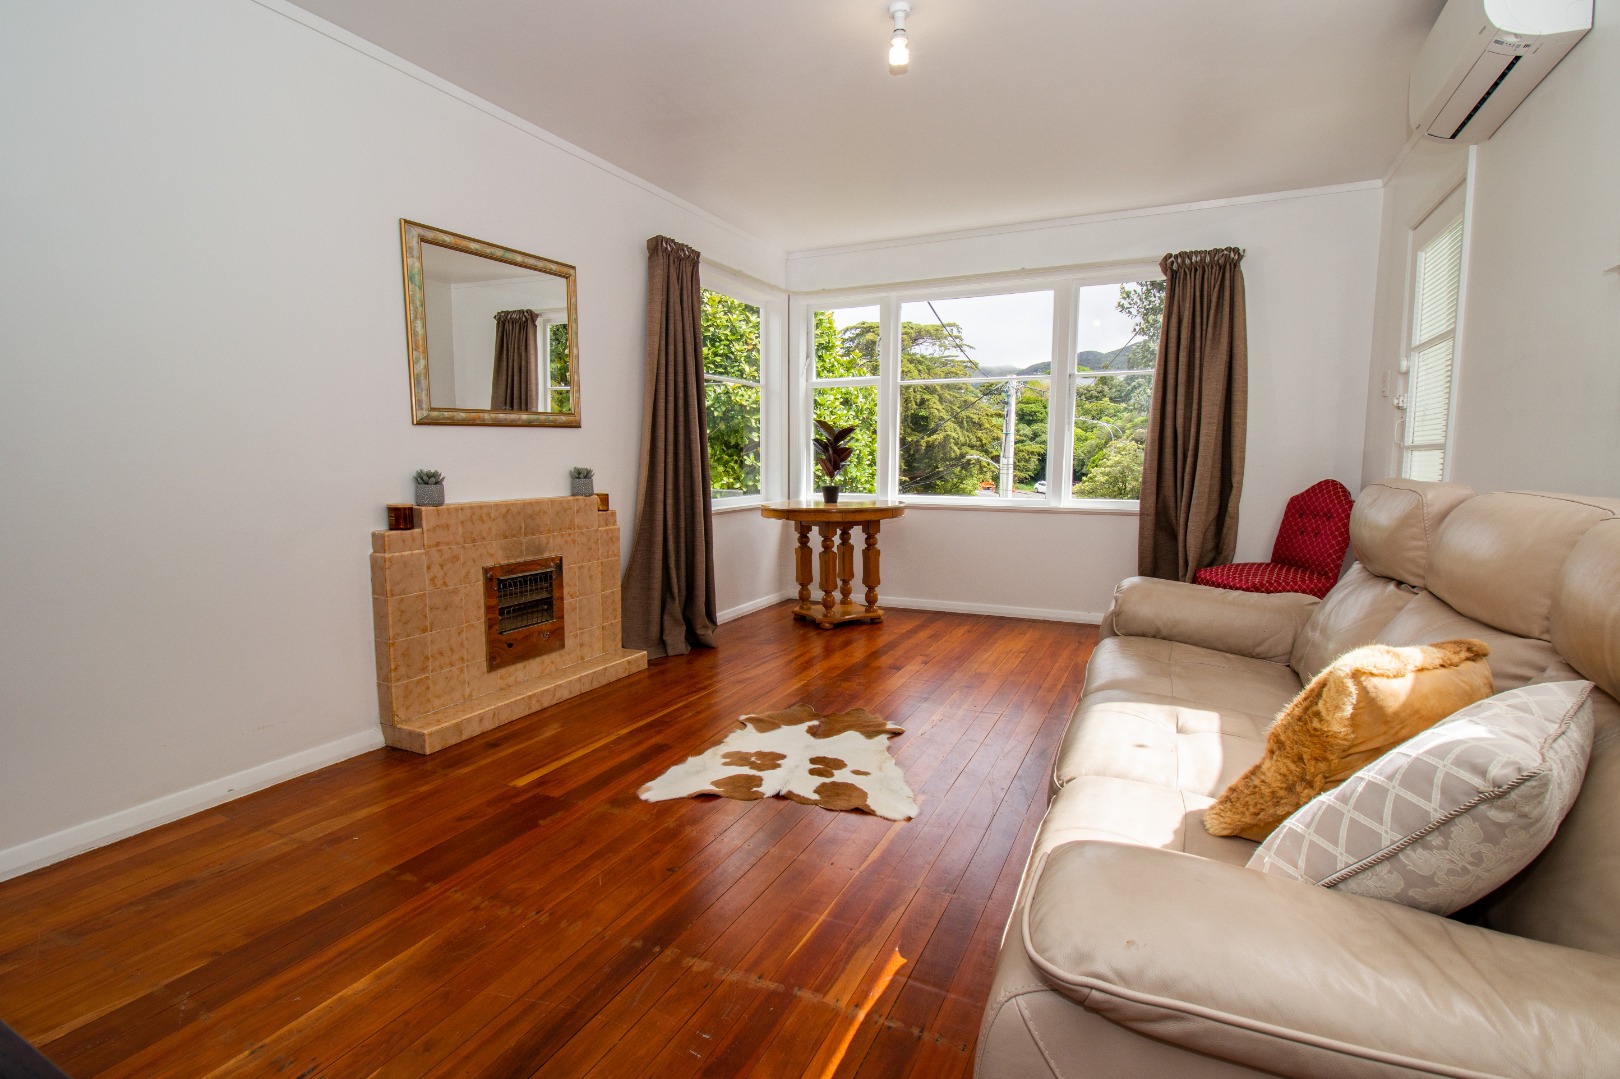 Real Estate For Rent Houses & Apartments : Spacious and Sunny haven Ngaio, Wellington